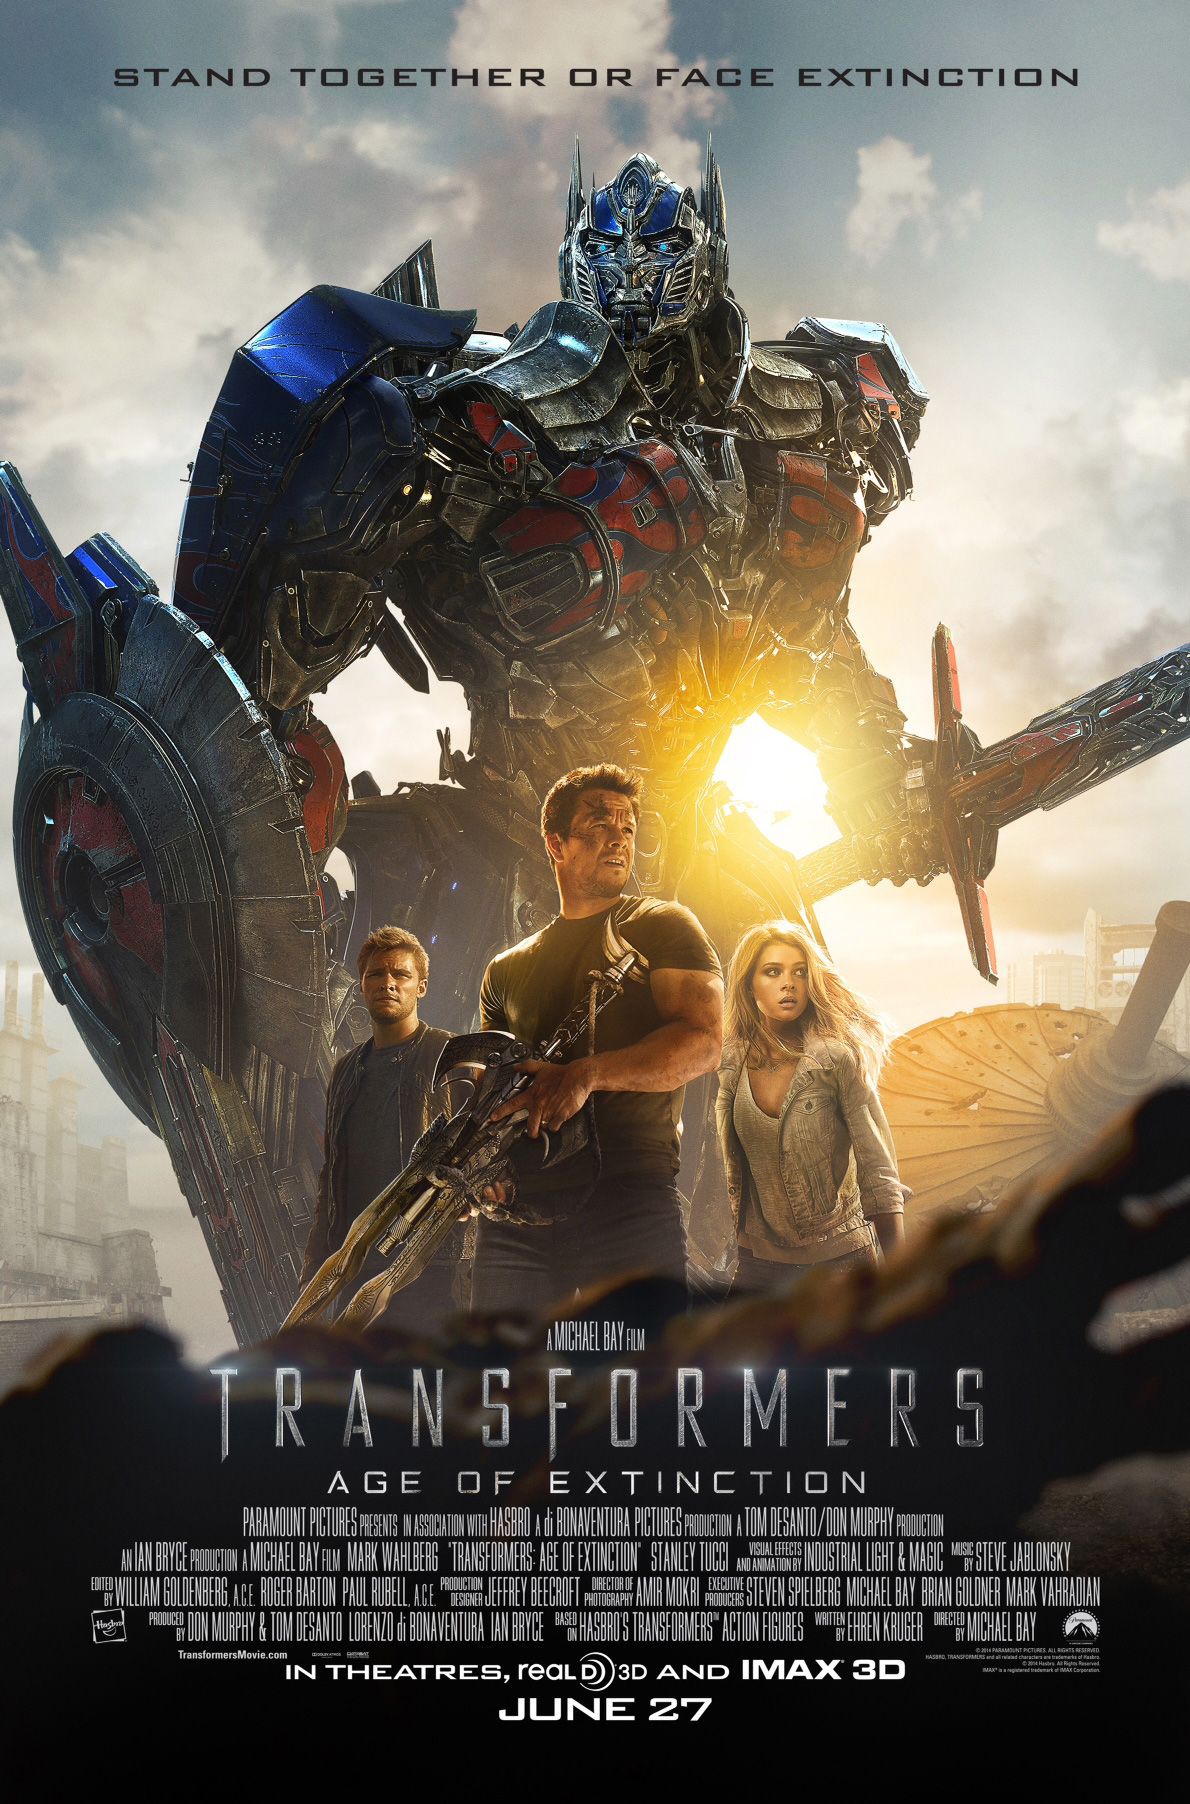 The cast is ready for battle on the new Transformers: Age of